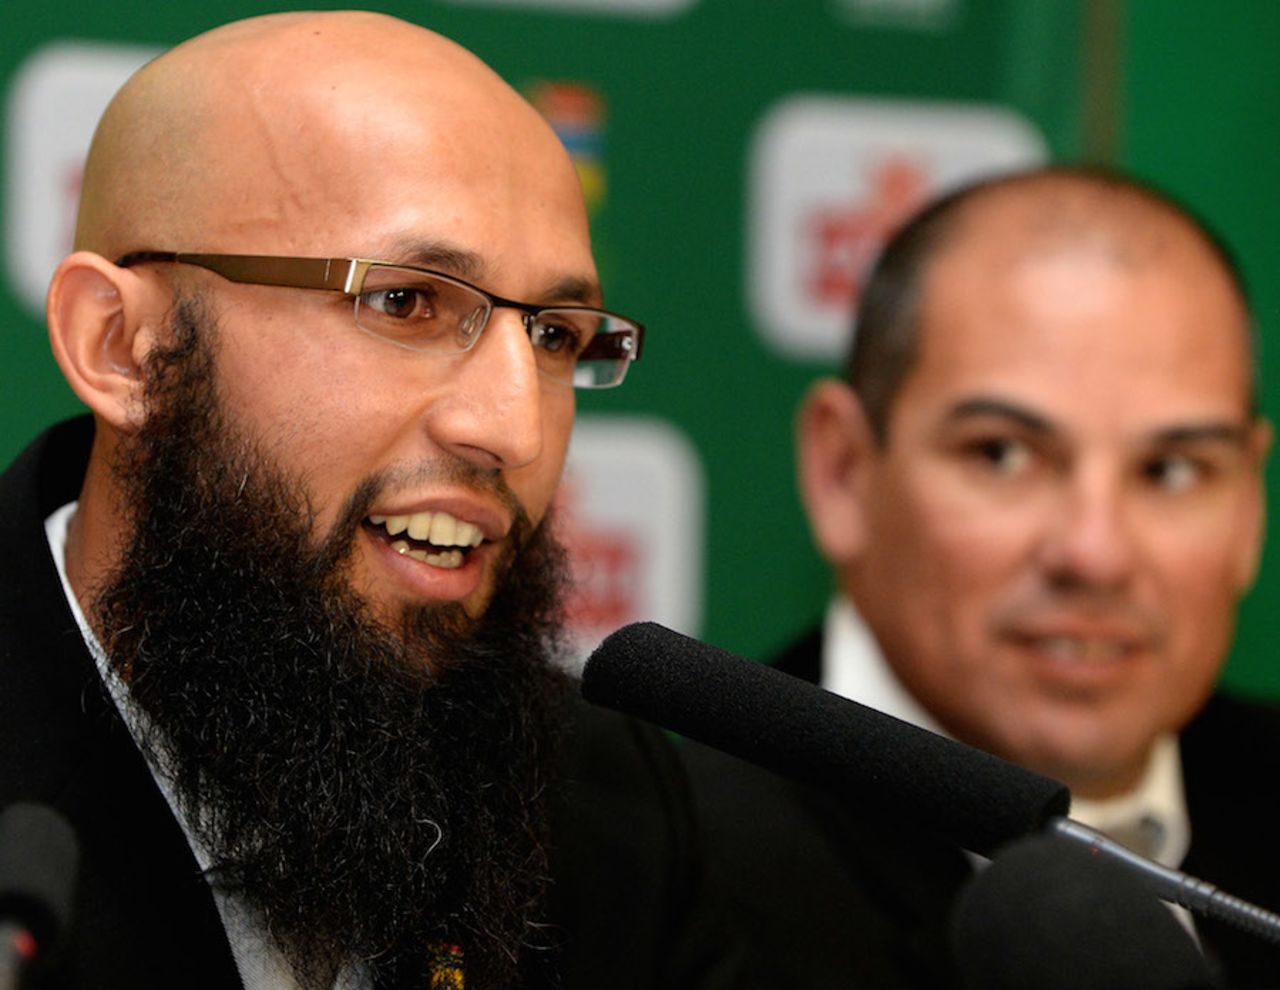 Hashim Amla address the media after being names South Africa Test captain, Johannesburg, June 3, 2014